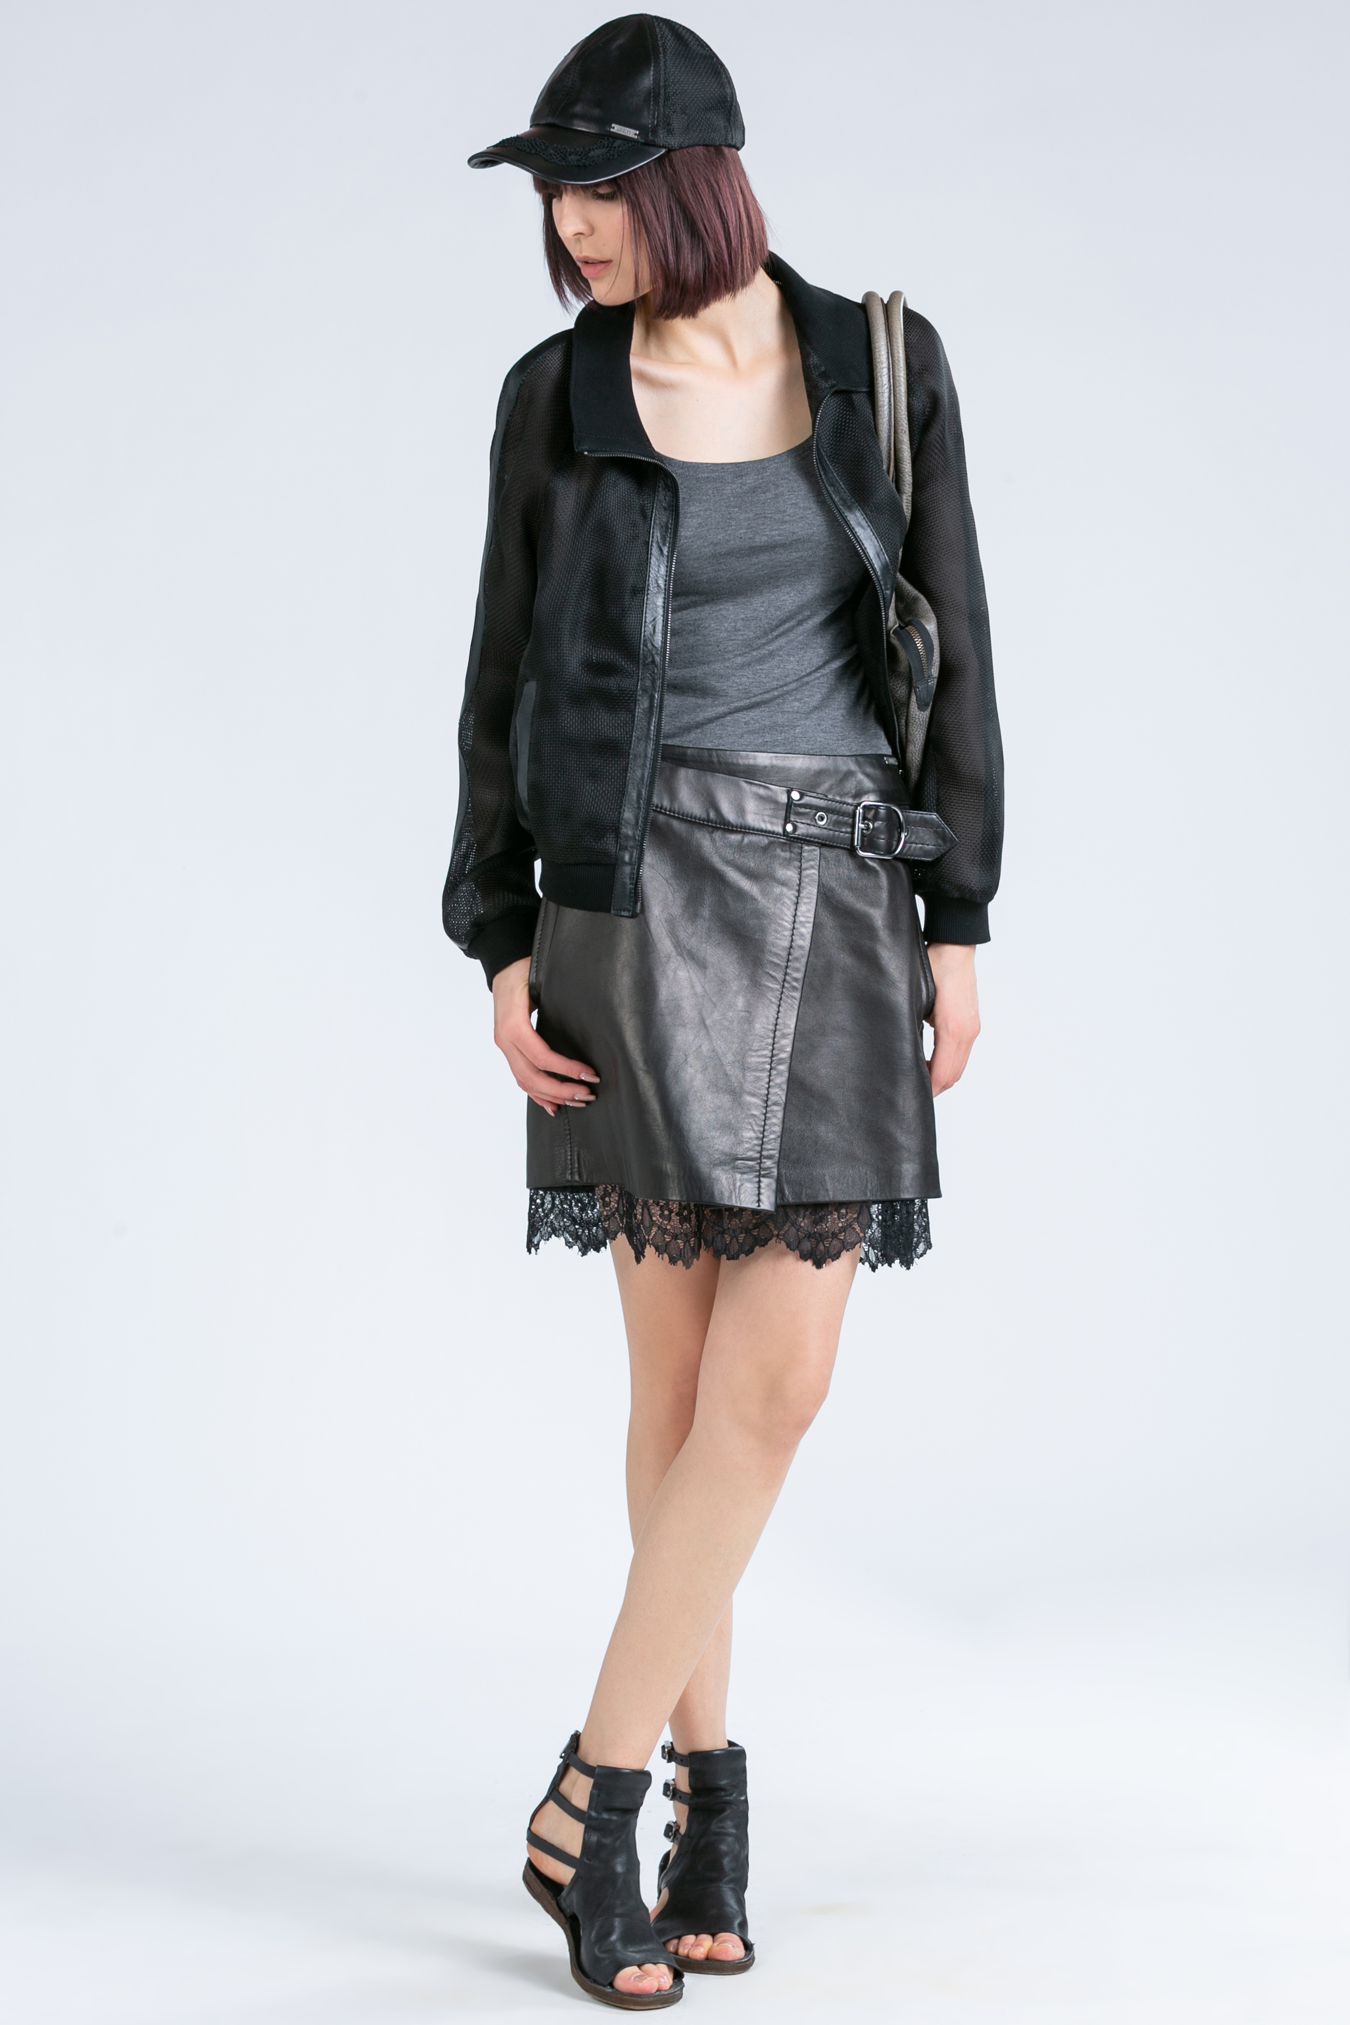 leather skirt, leather skirt ﻿with petticoat finished with lace, black leather skirt, black envelope skirt, leather mini skirt, envelope leather mini skirt